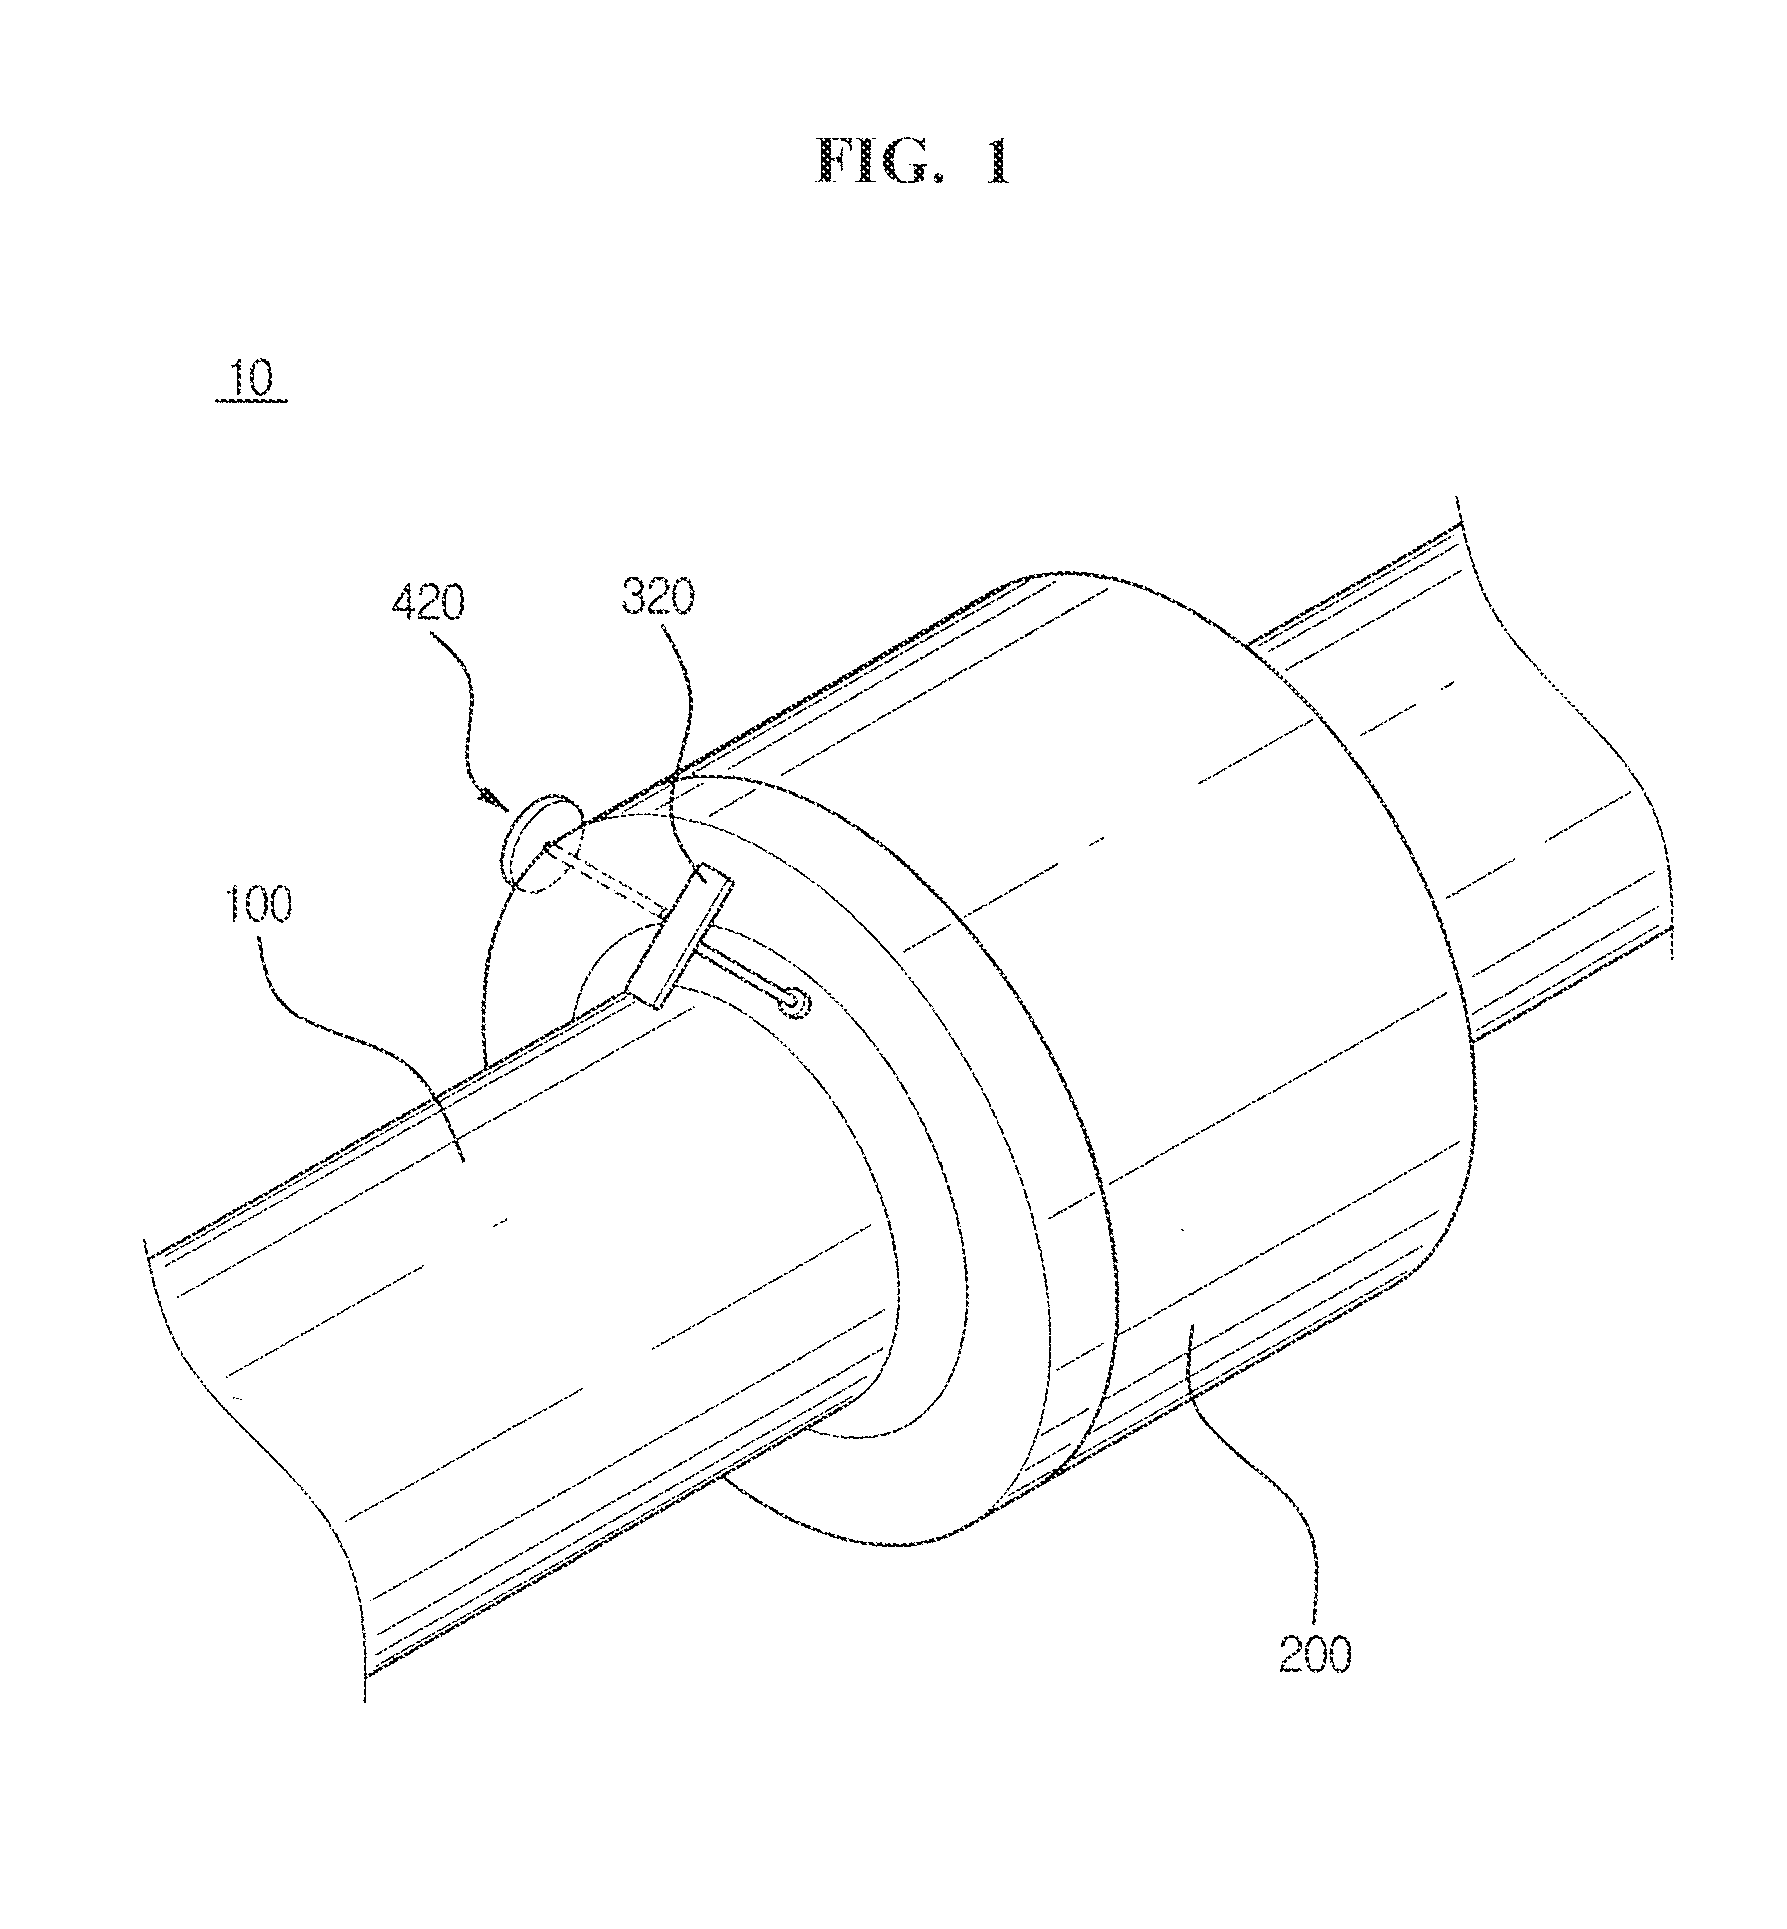 Coupling and decoupling assembly of pipe having double valve